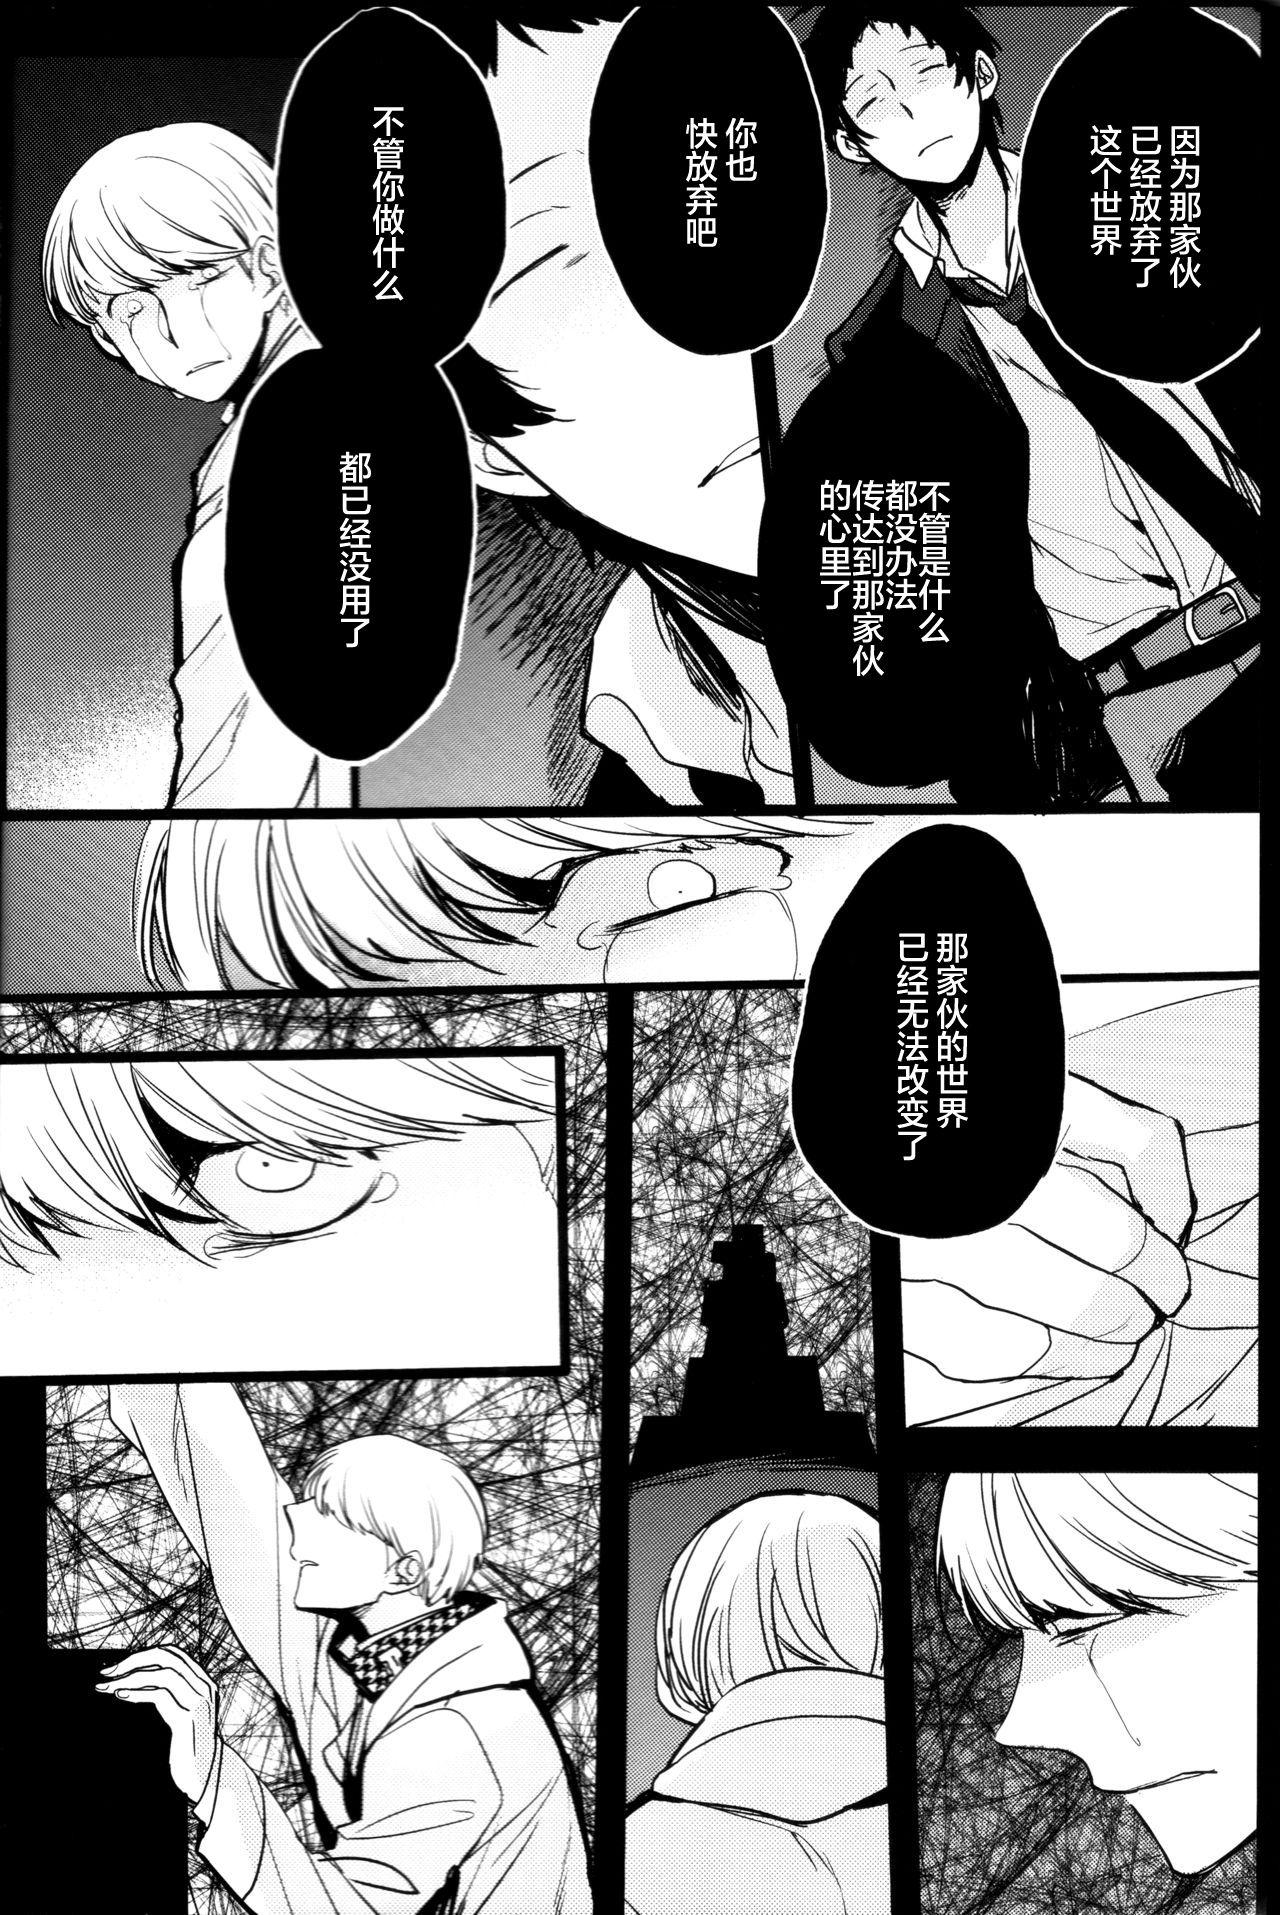 Amateurs The End Of The World Volume 3 - Persona 4 Black Hair - Page 8